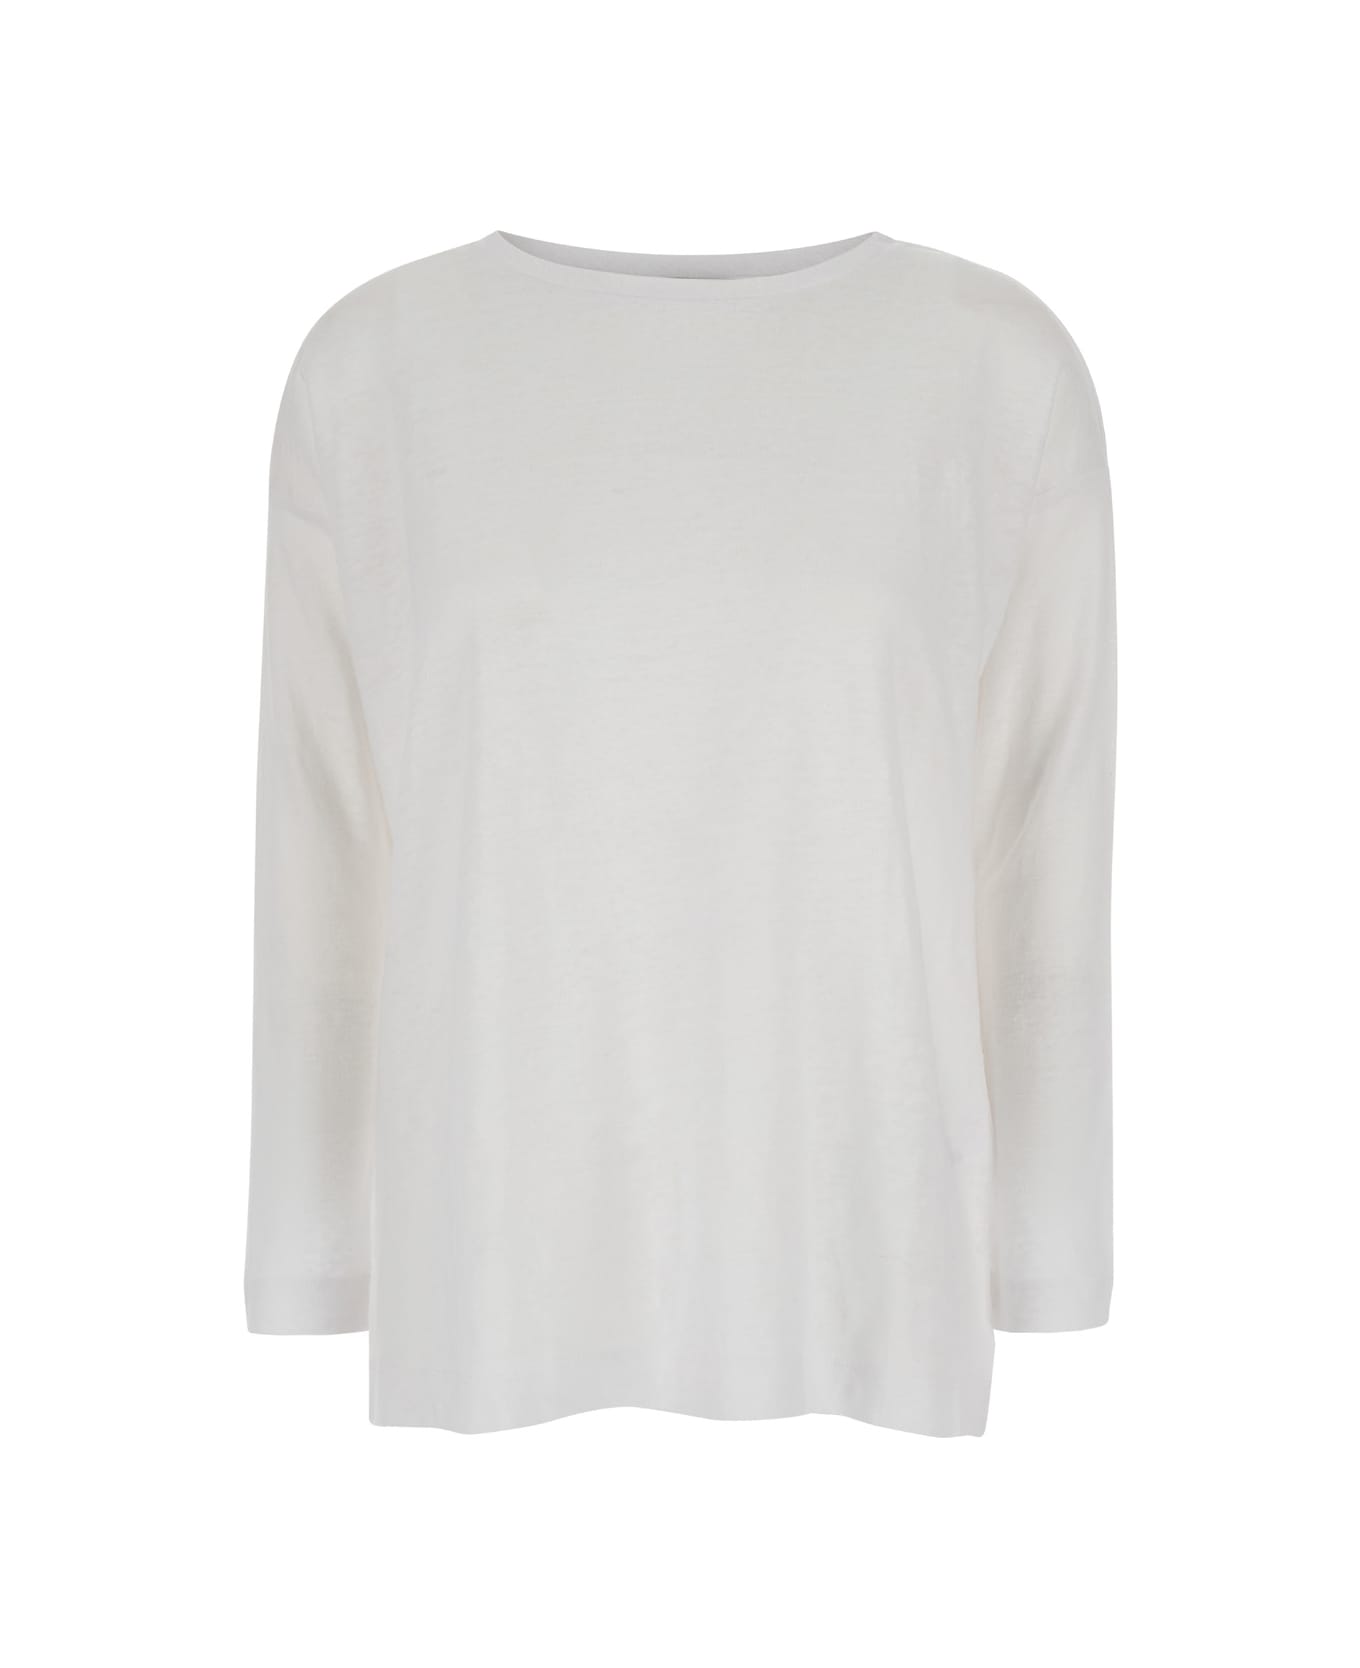 Allude White Shirt With Boart Neckline In Linen Woman - White